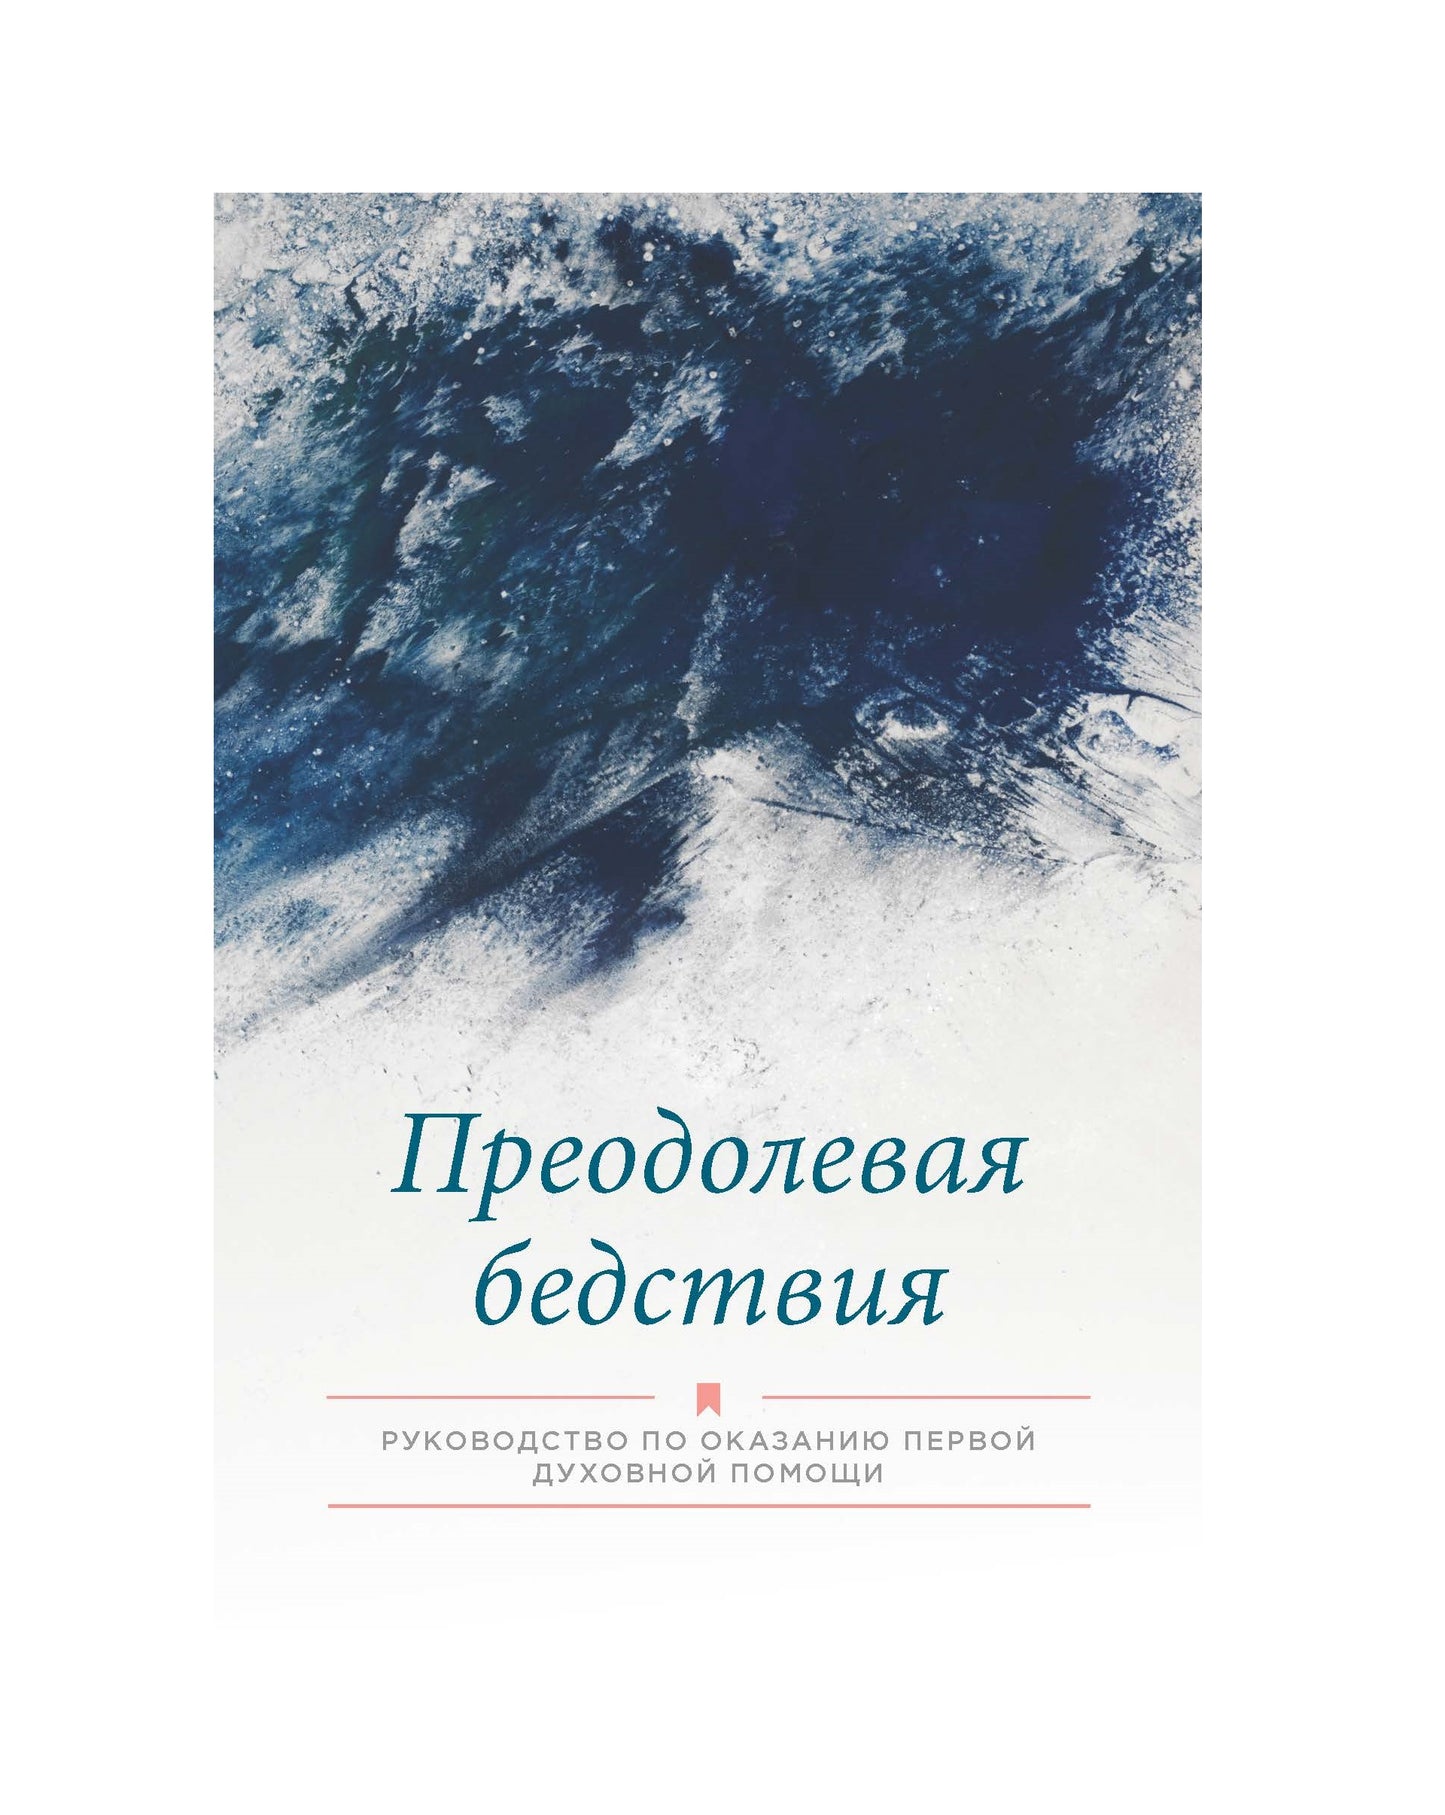 Beyond Disaster Booklet in Russian